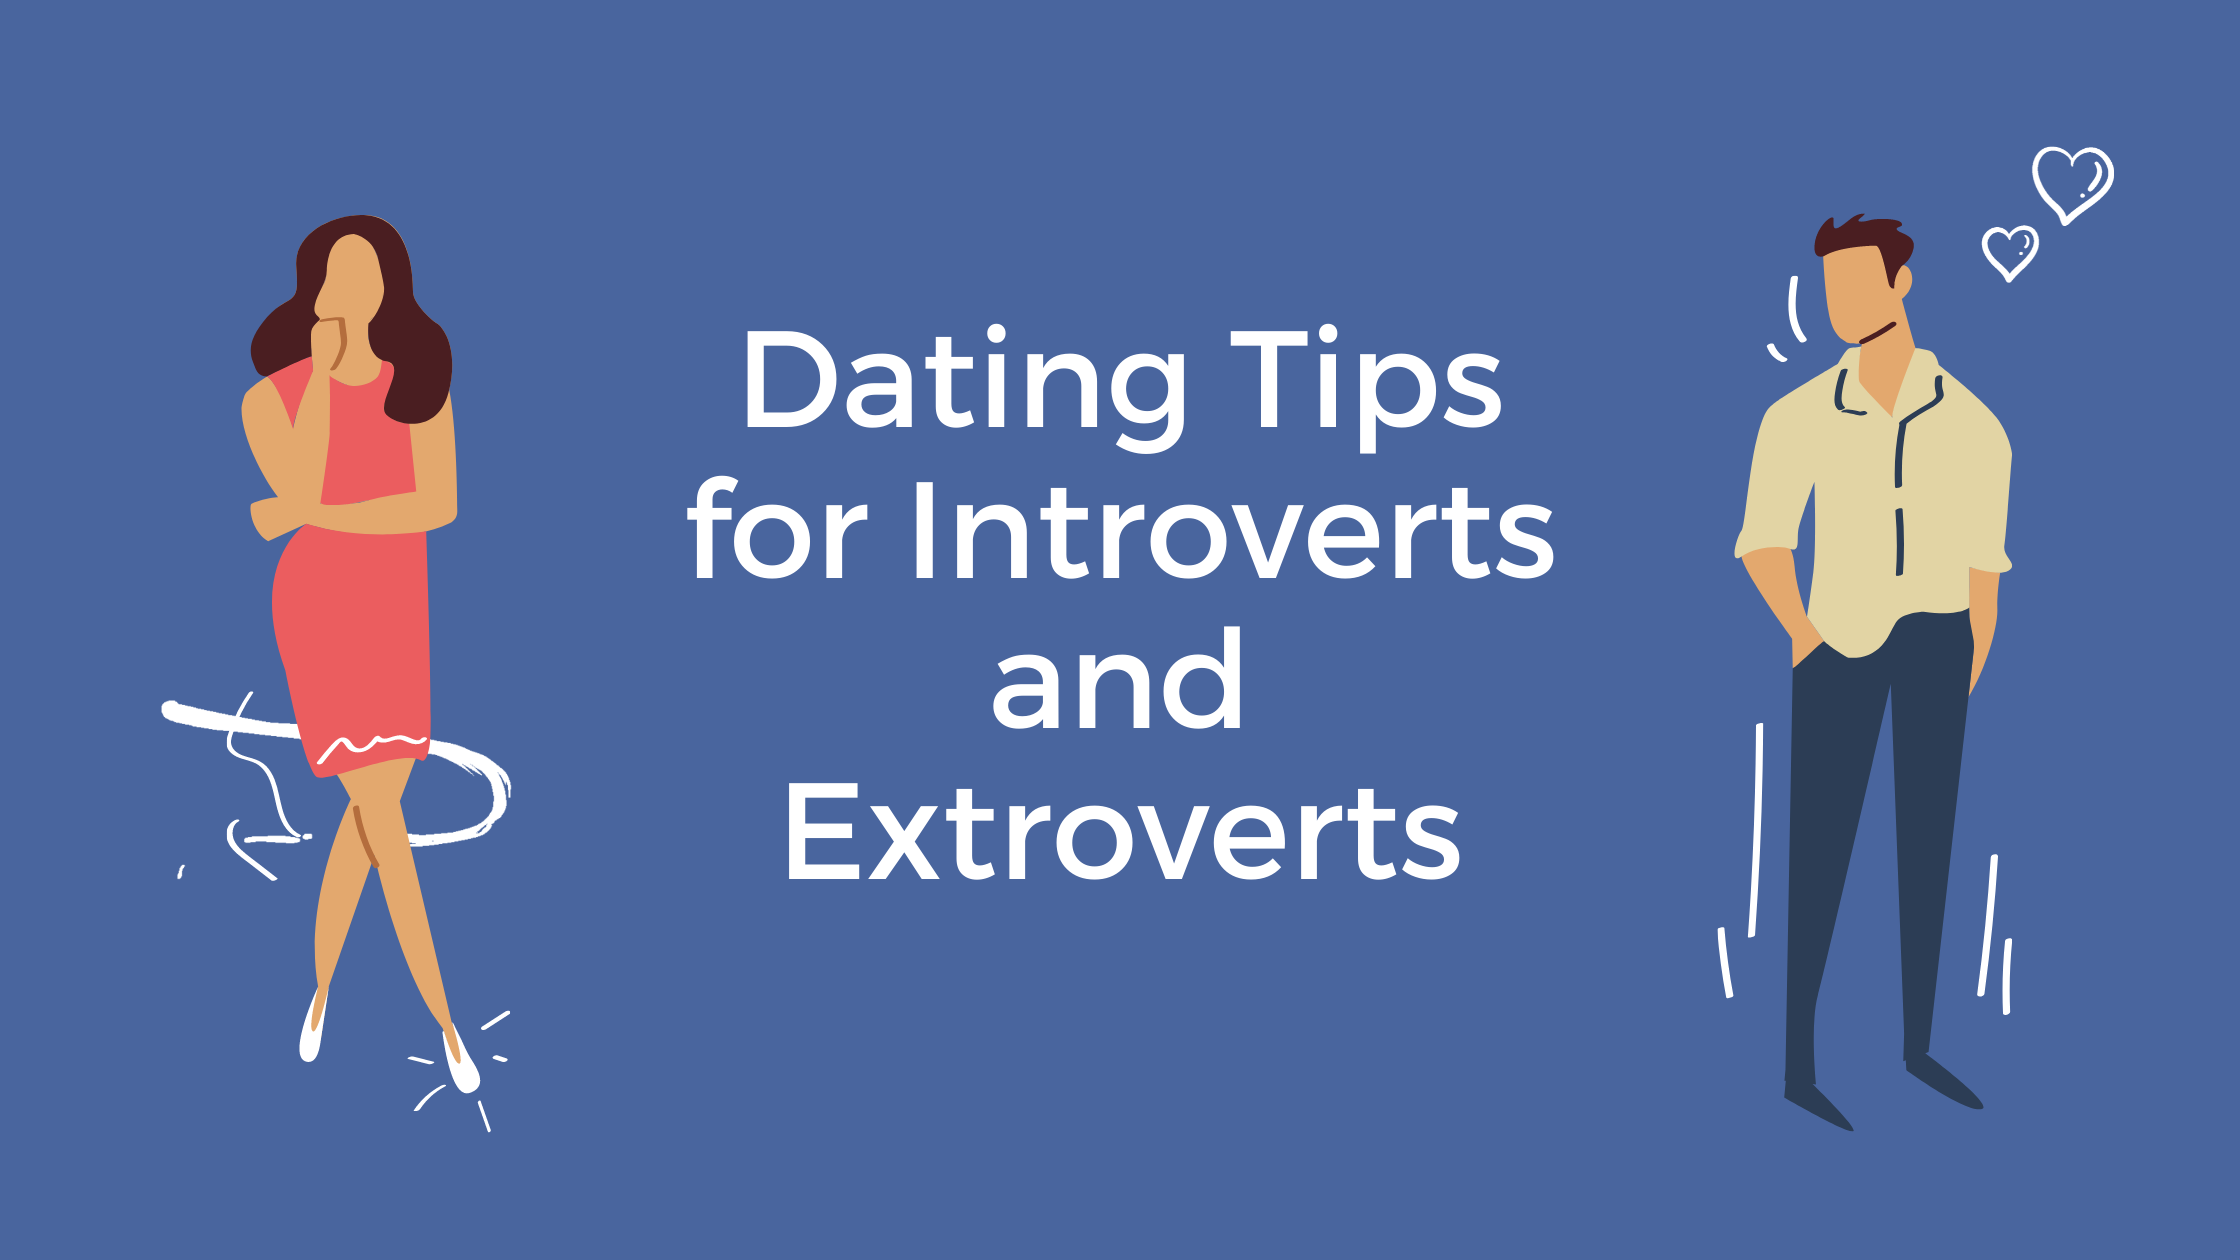 Dating Tips for Introverts and Extroverts